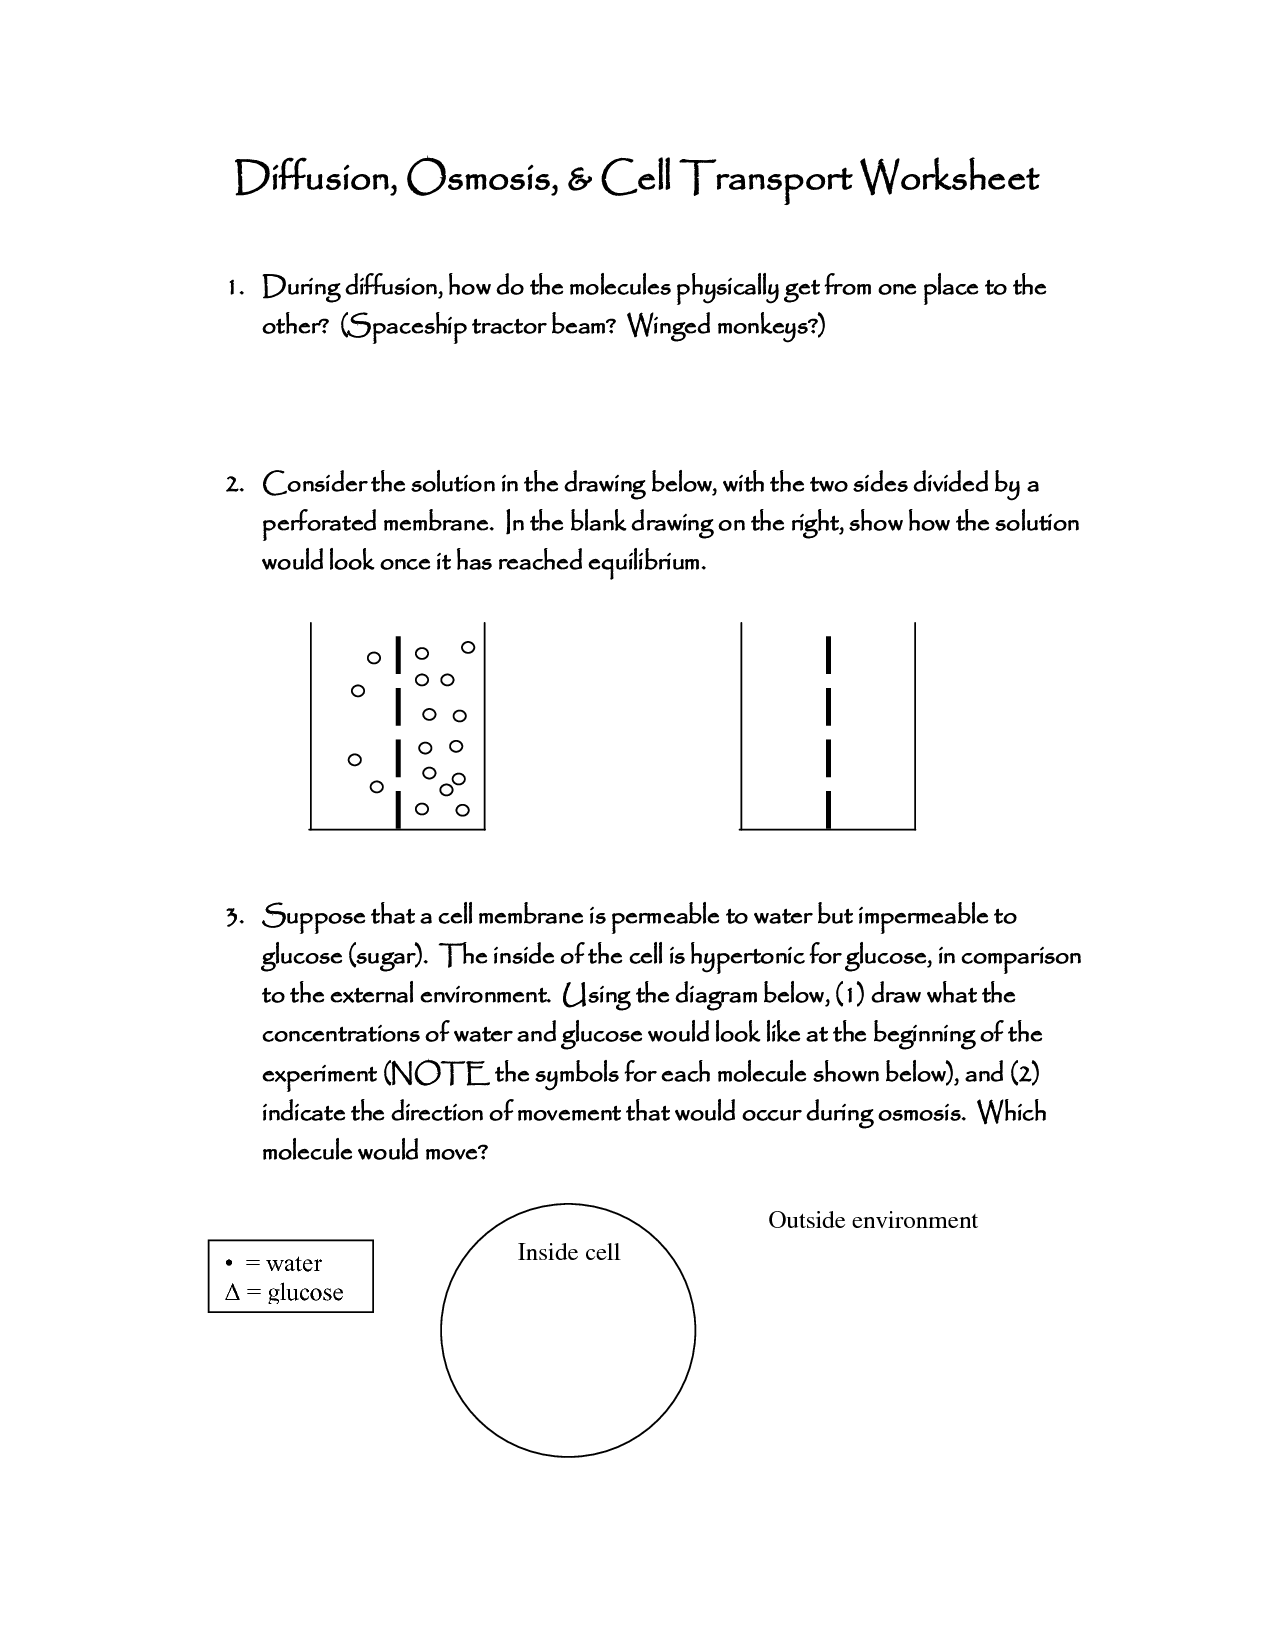 17 Best Images of Osmosis Worksheet Answers - Osmosis and ...